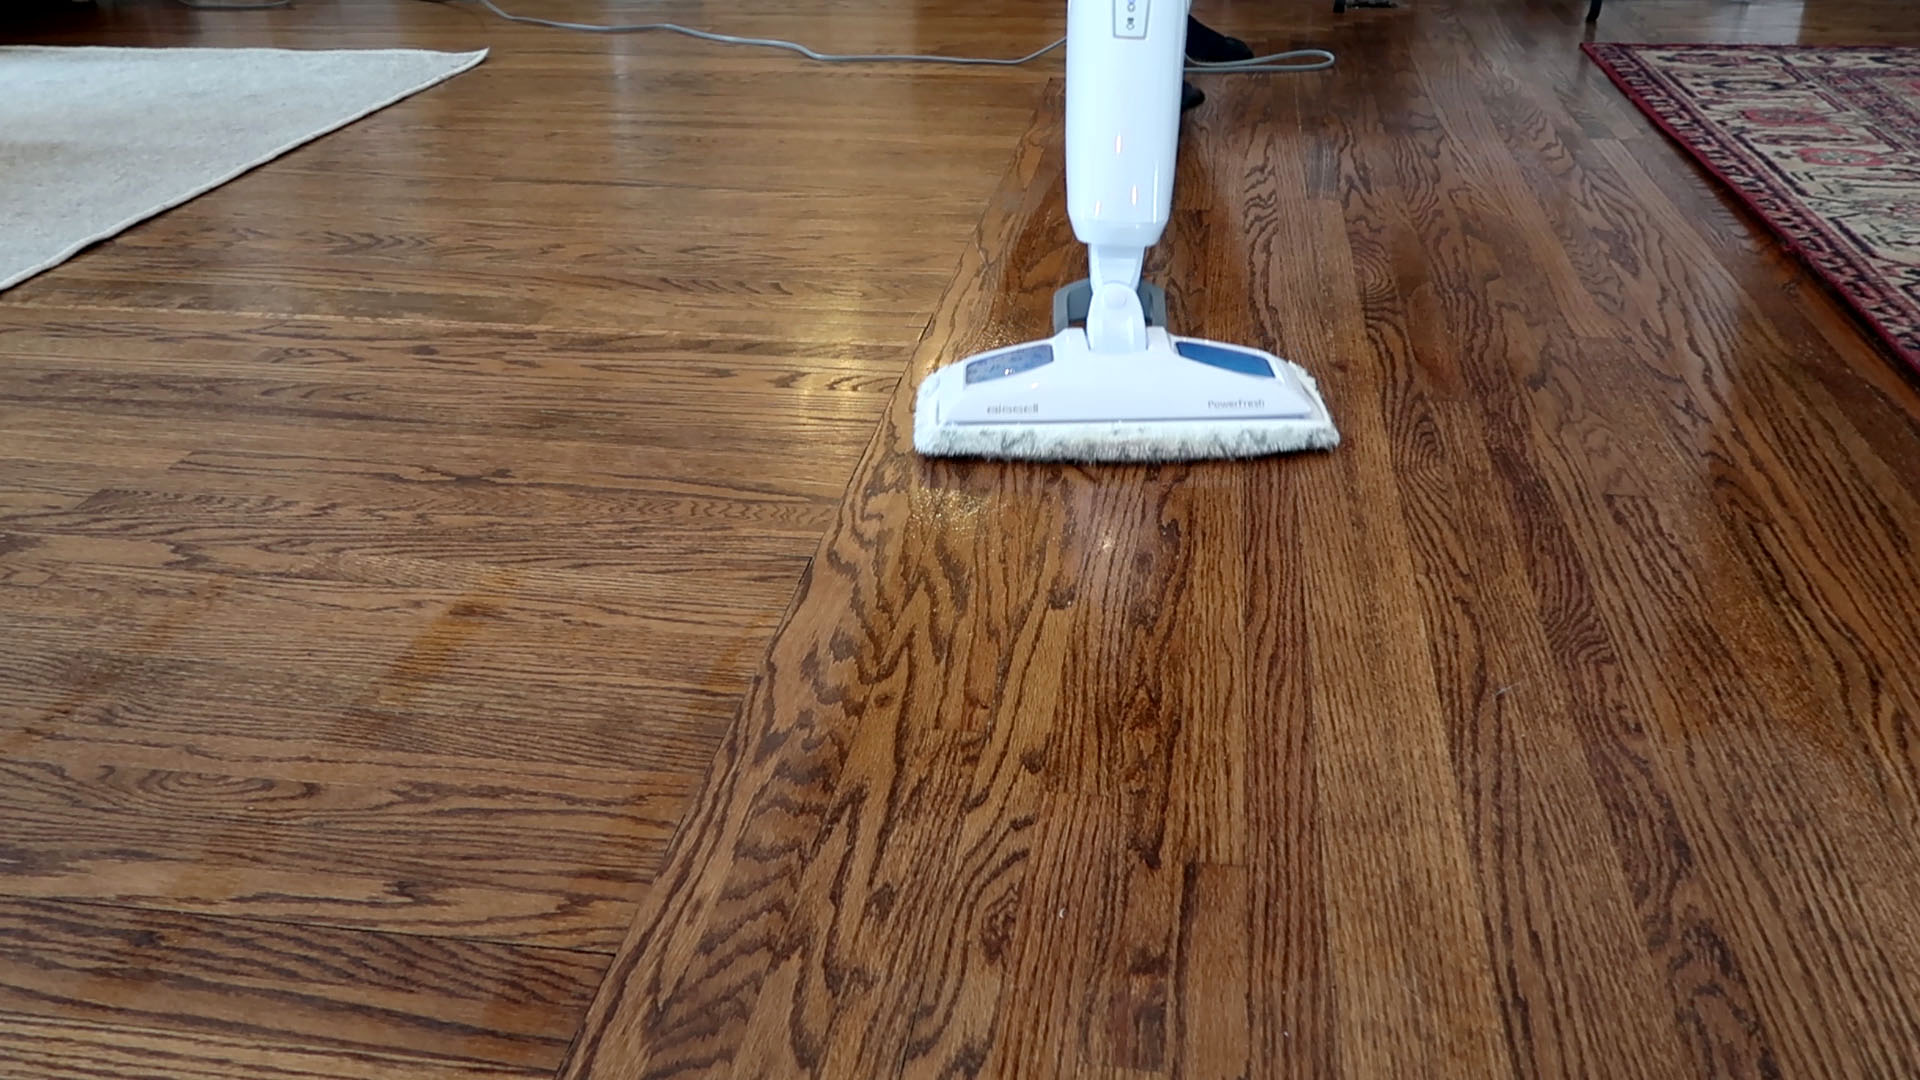 How To Use Floor Steamer